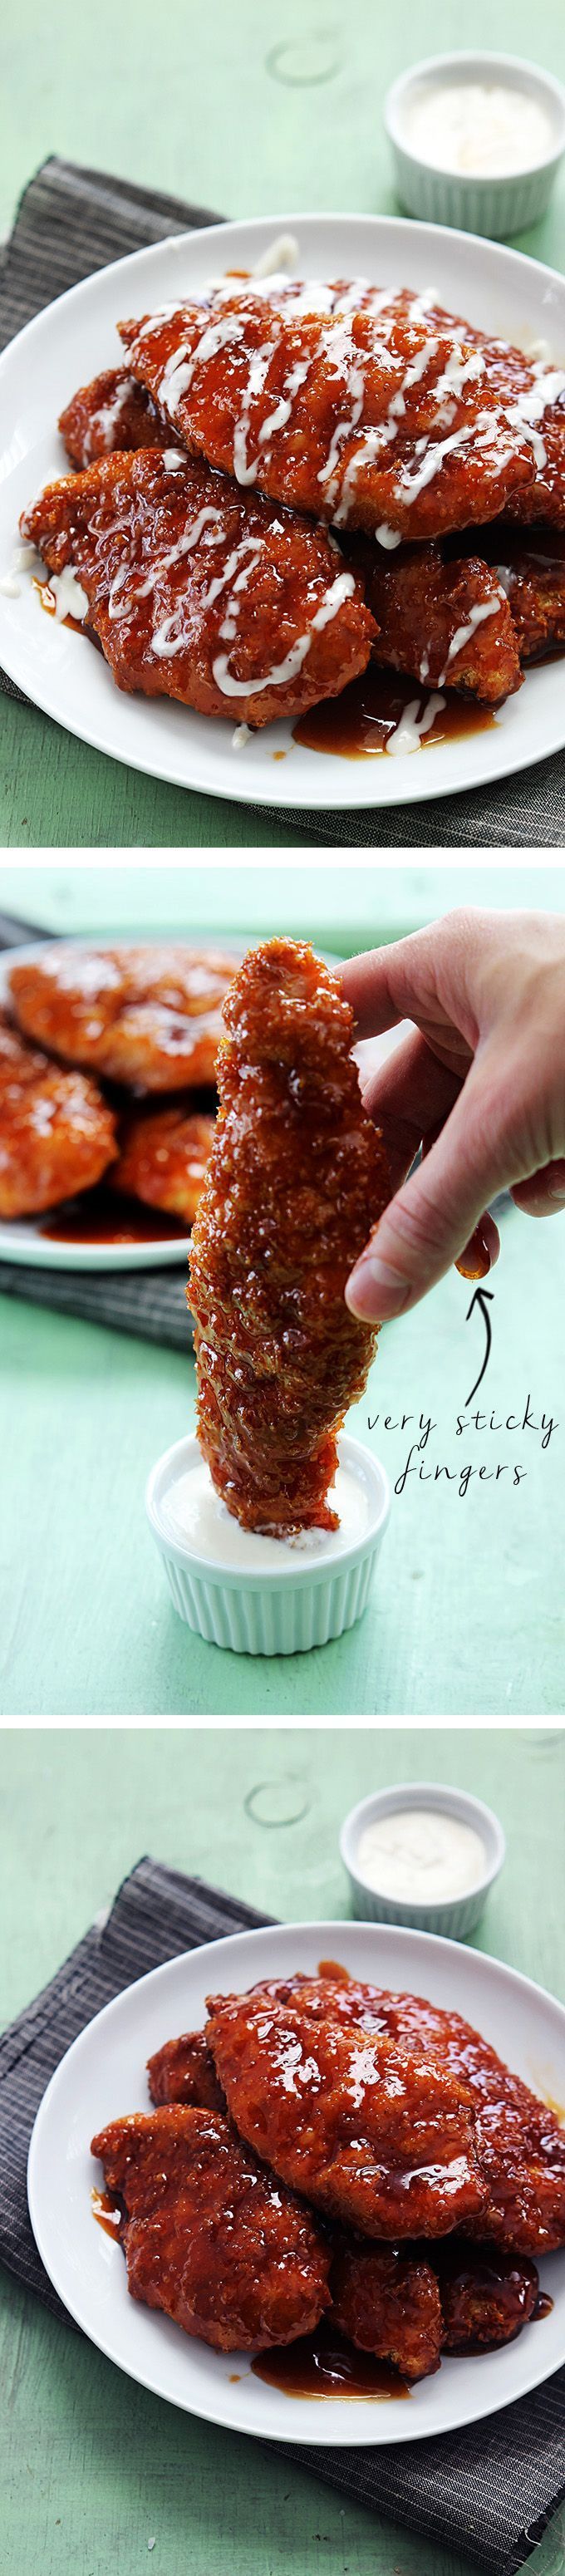 Now you can make Winger’s famous sticky fingers right at home anytime you get a craving. 3 easy steps will put these saucy baked